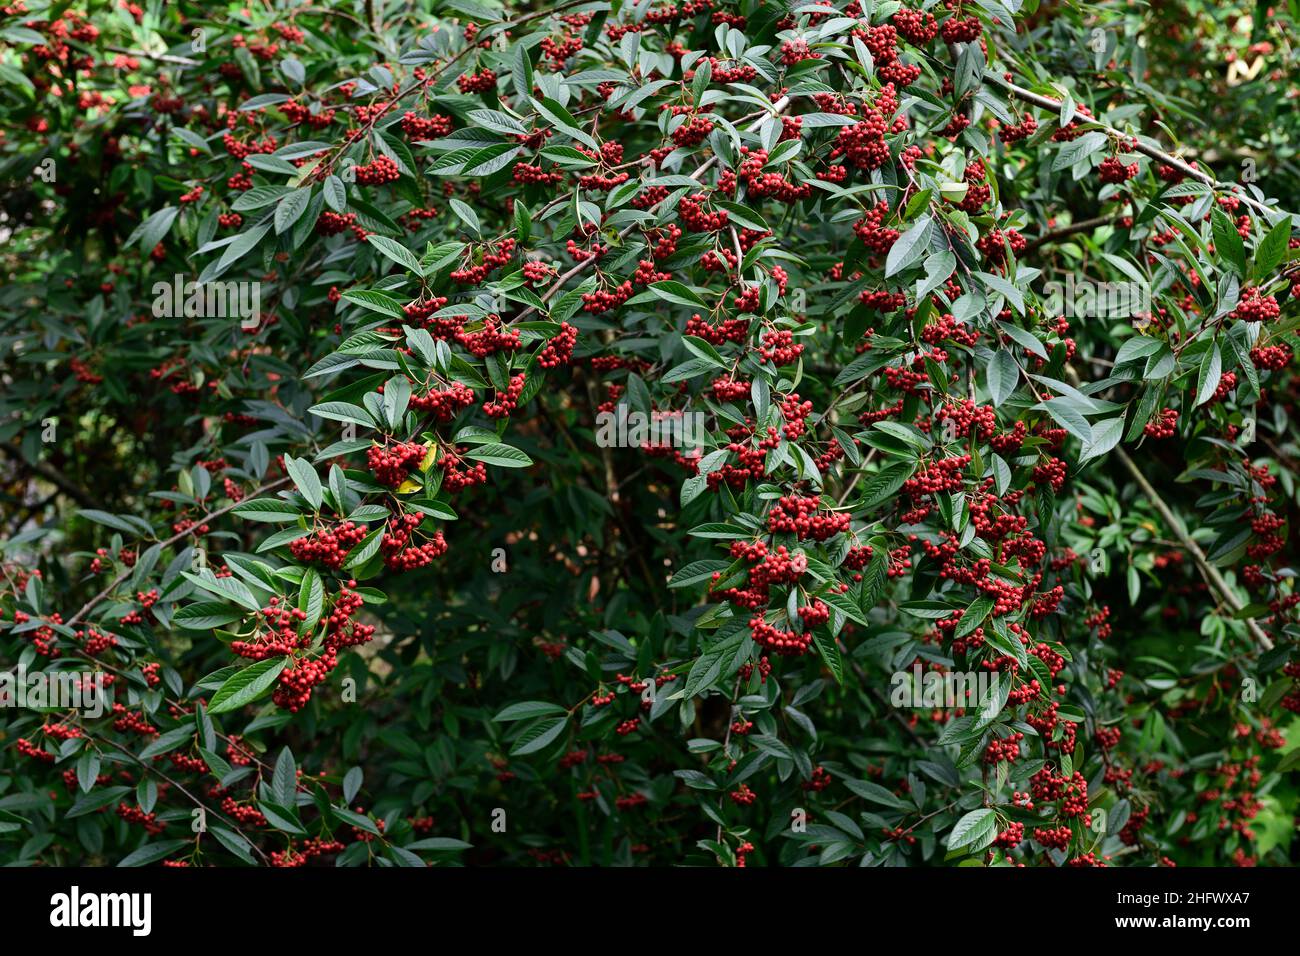 Cotoneaster salicifolius Hybridus Pendulus,fruits,winter,red berries,Weeping Cotoneaster,red fruit,garden,evergreen,gardens,RM Floral Stock Photo